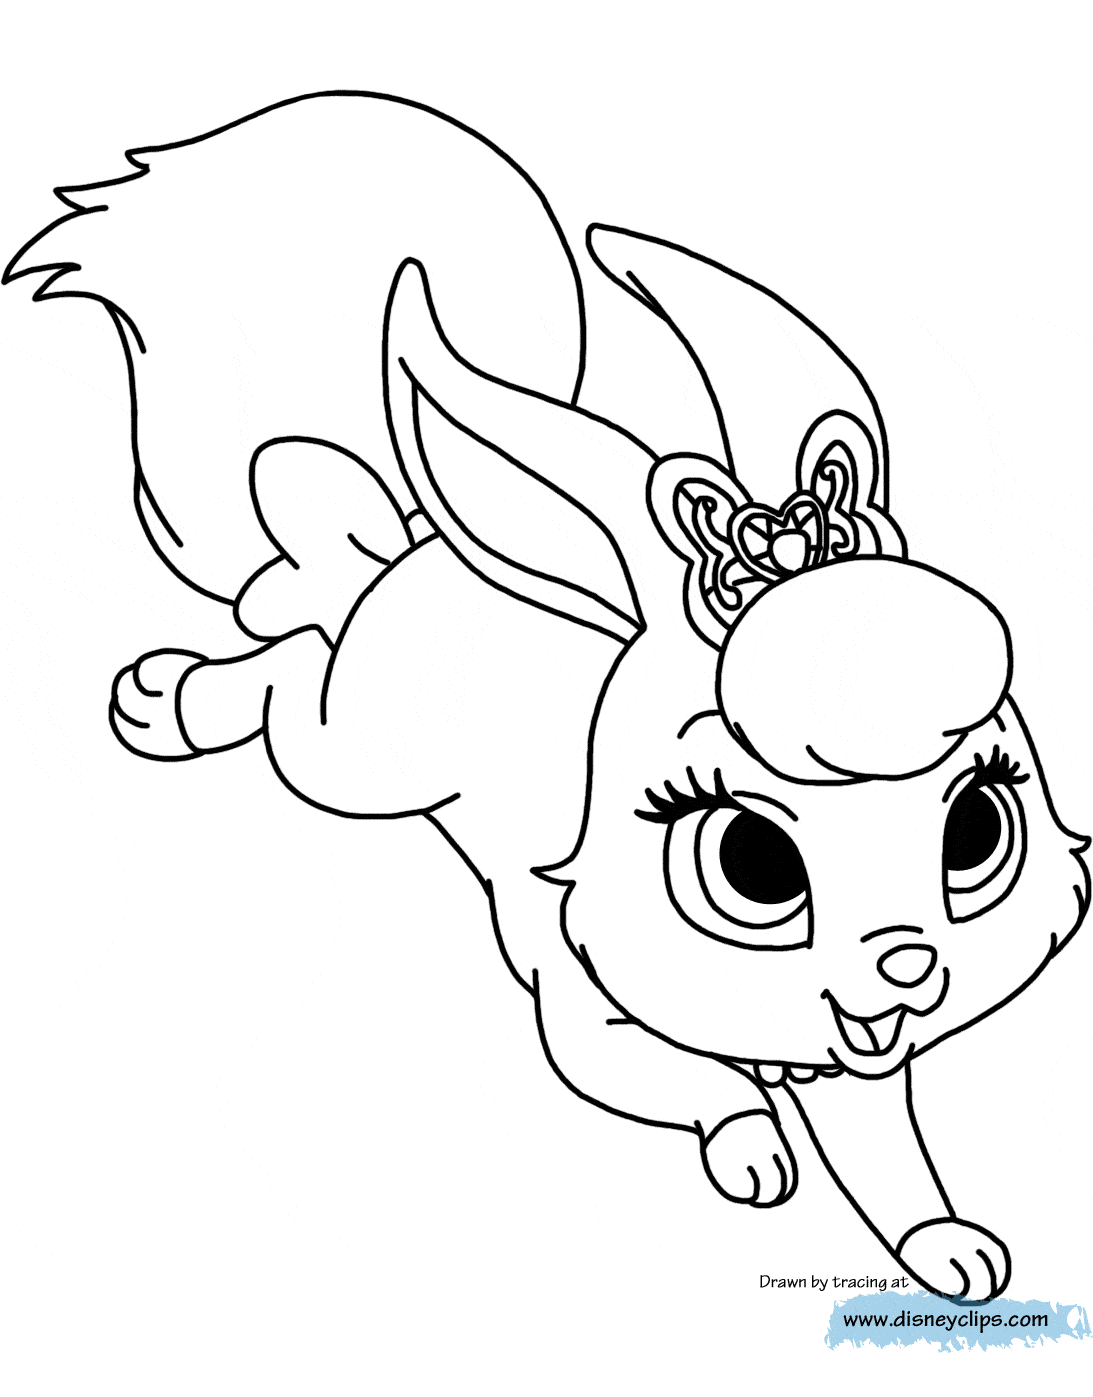 Download Palace Pets Coloring Pages (2) | Disneyclips.com